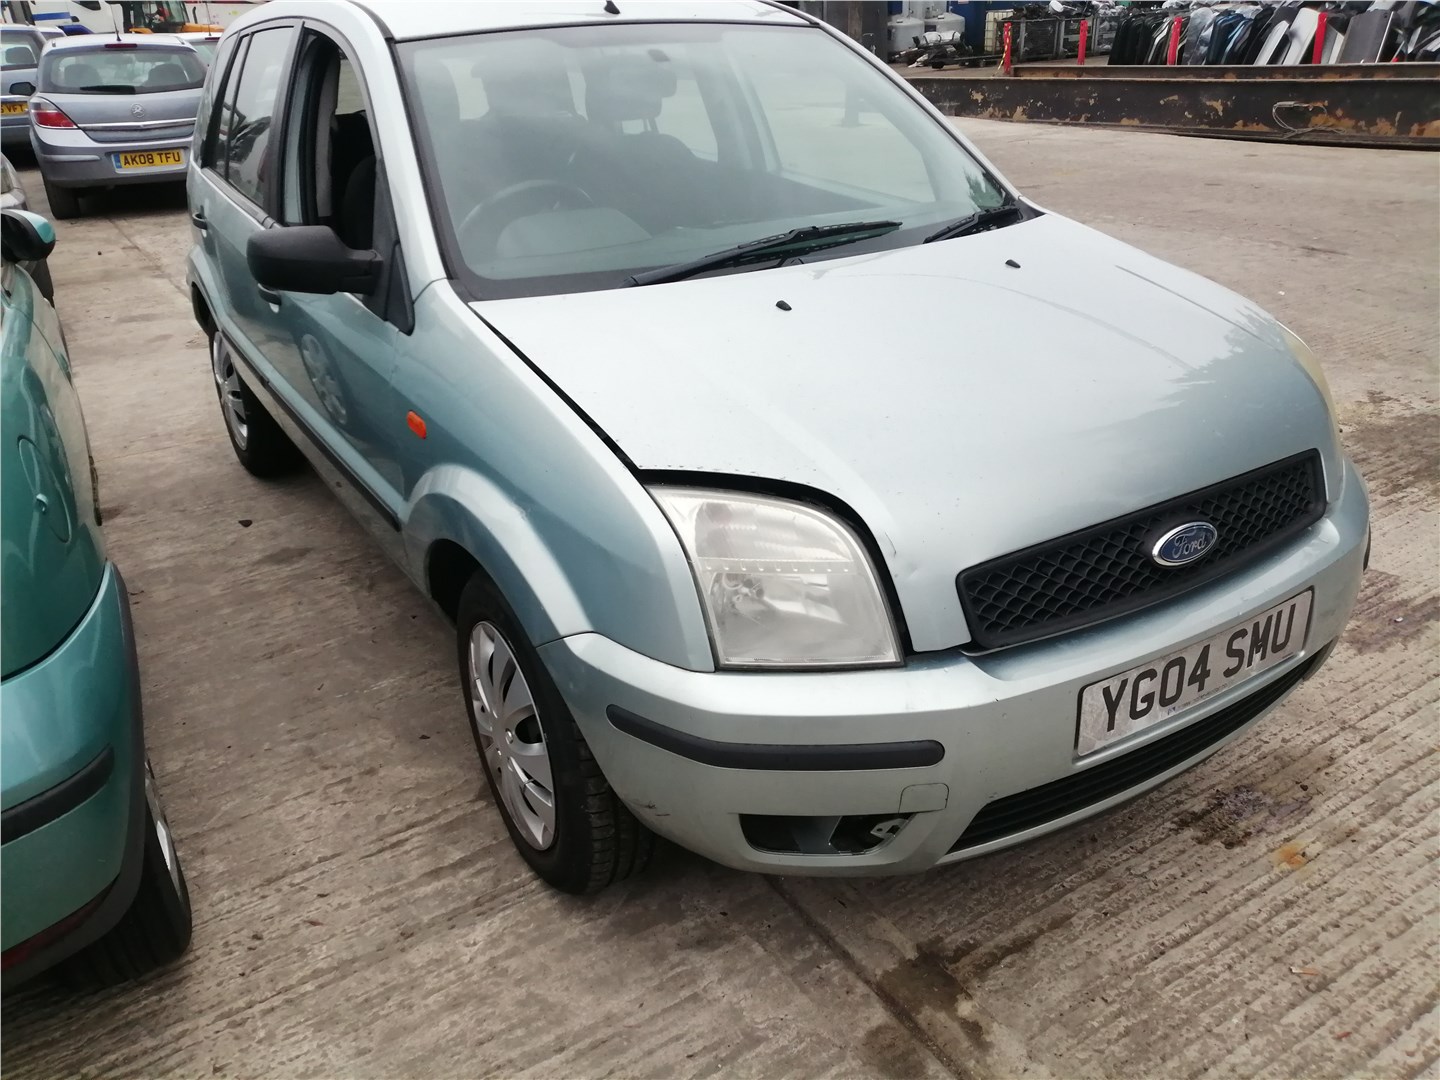 2S6T14A076BA Блок реле Ford Fusion 2002-2012 2004